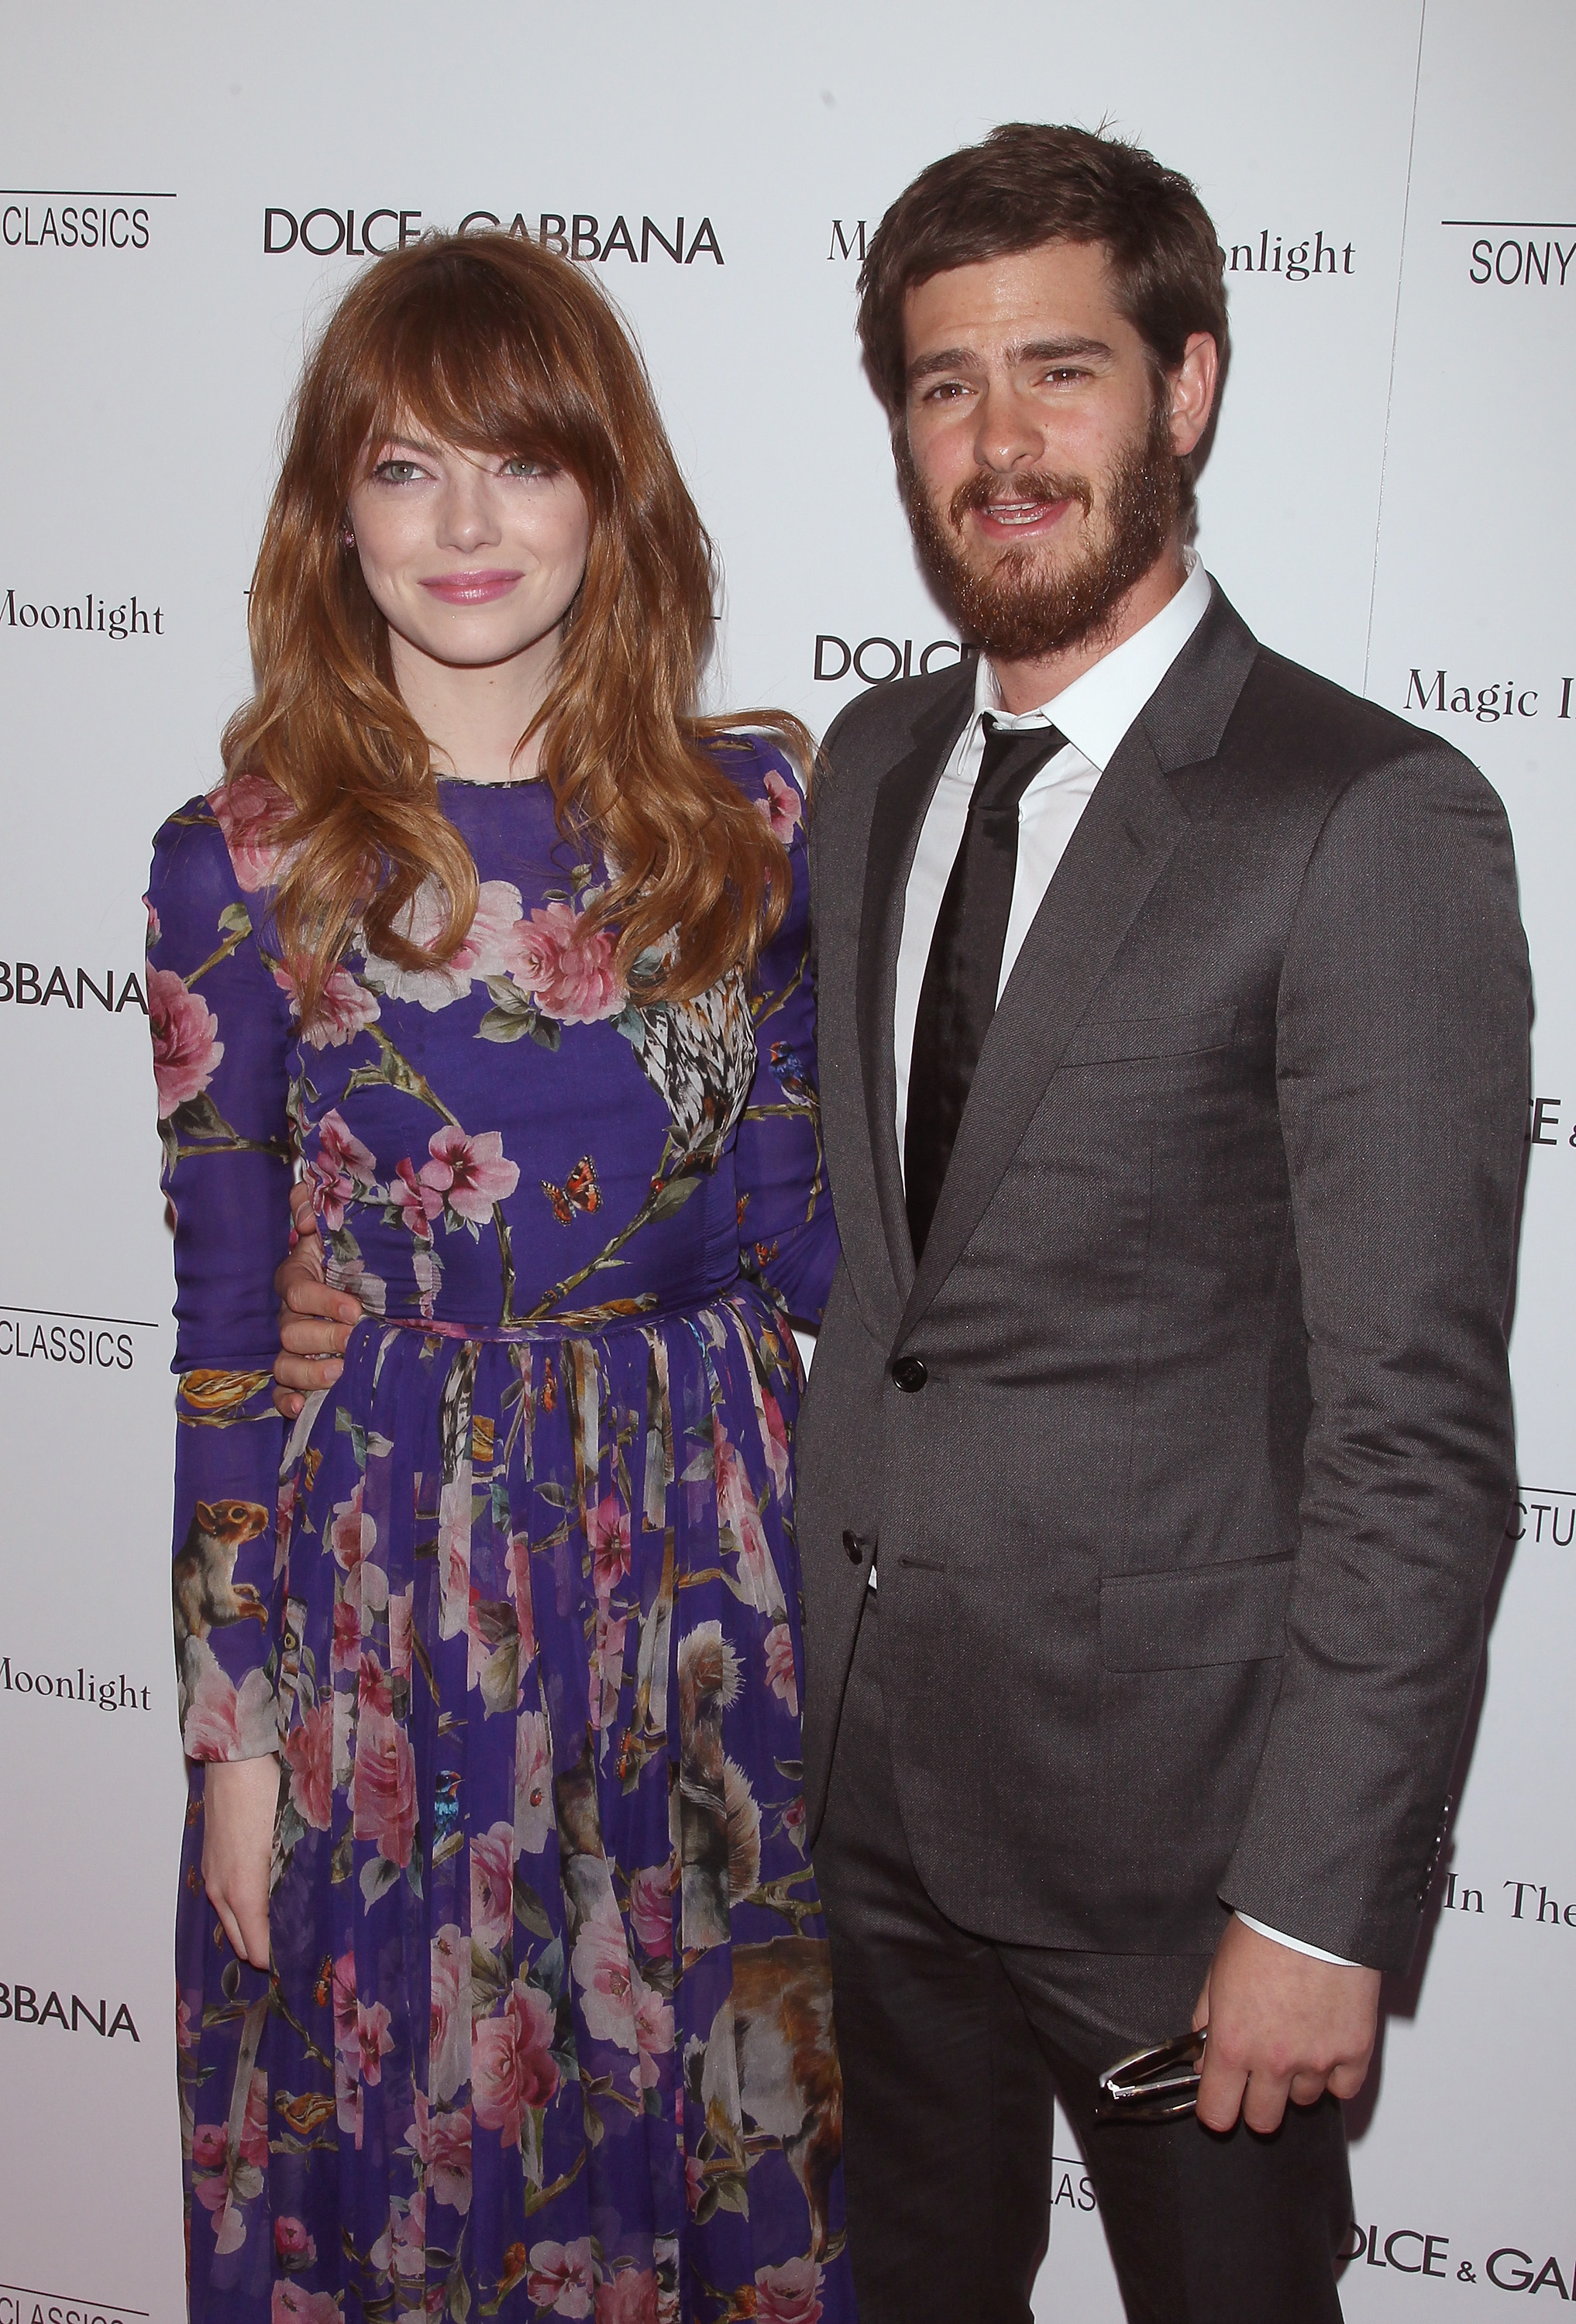 Emma Stone and Andrew Garfield attend "Magic In The Moonlight" premiere in New York City on July 17, 2014.